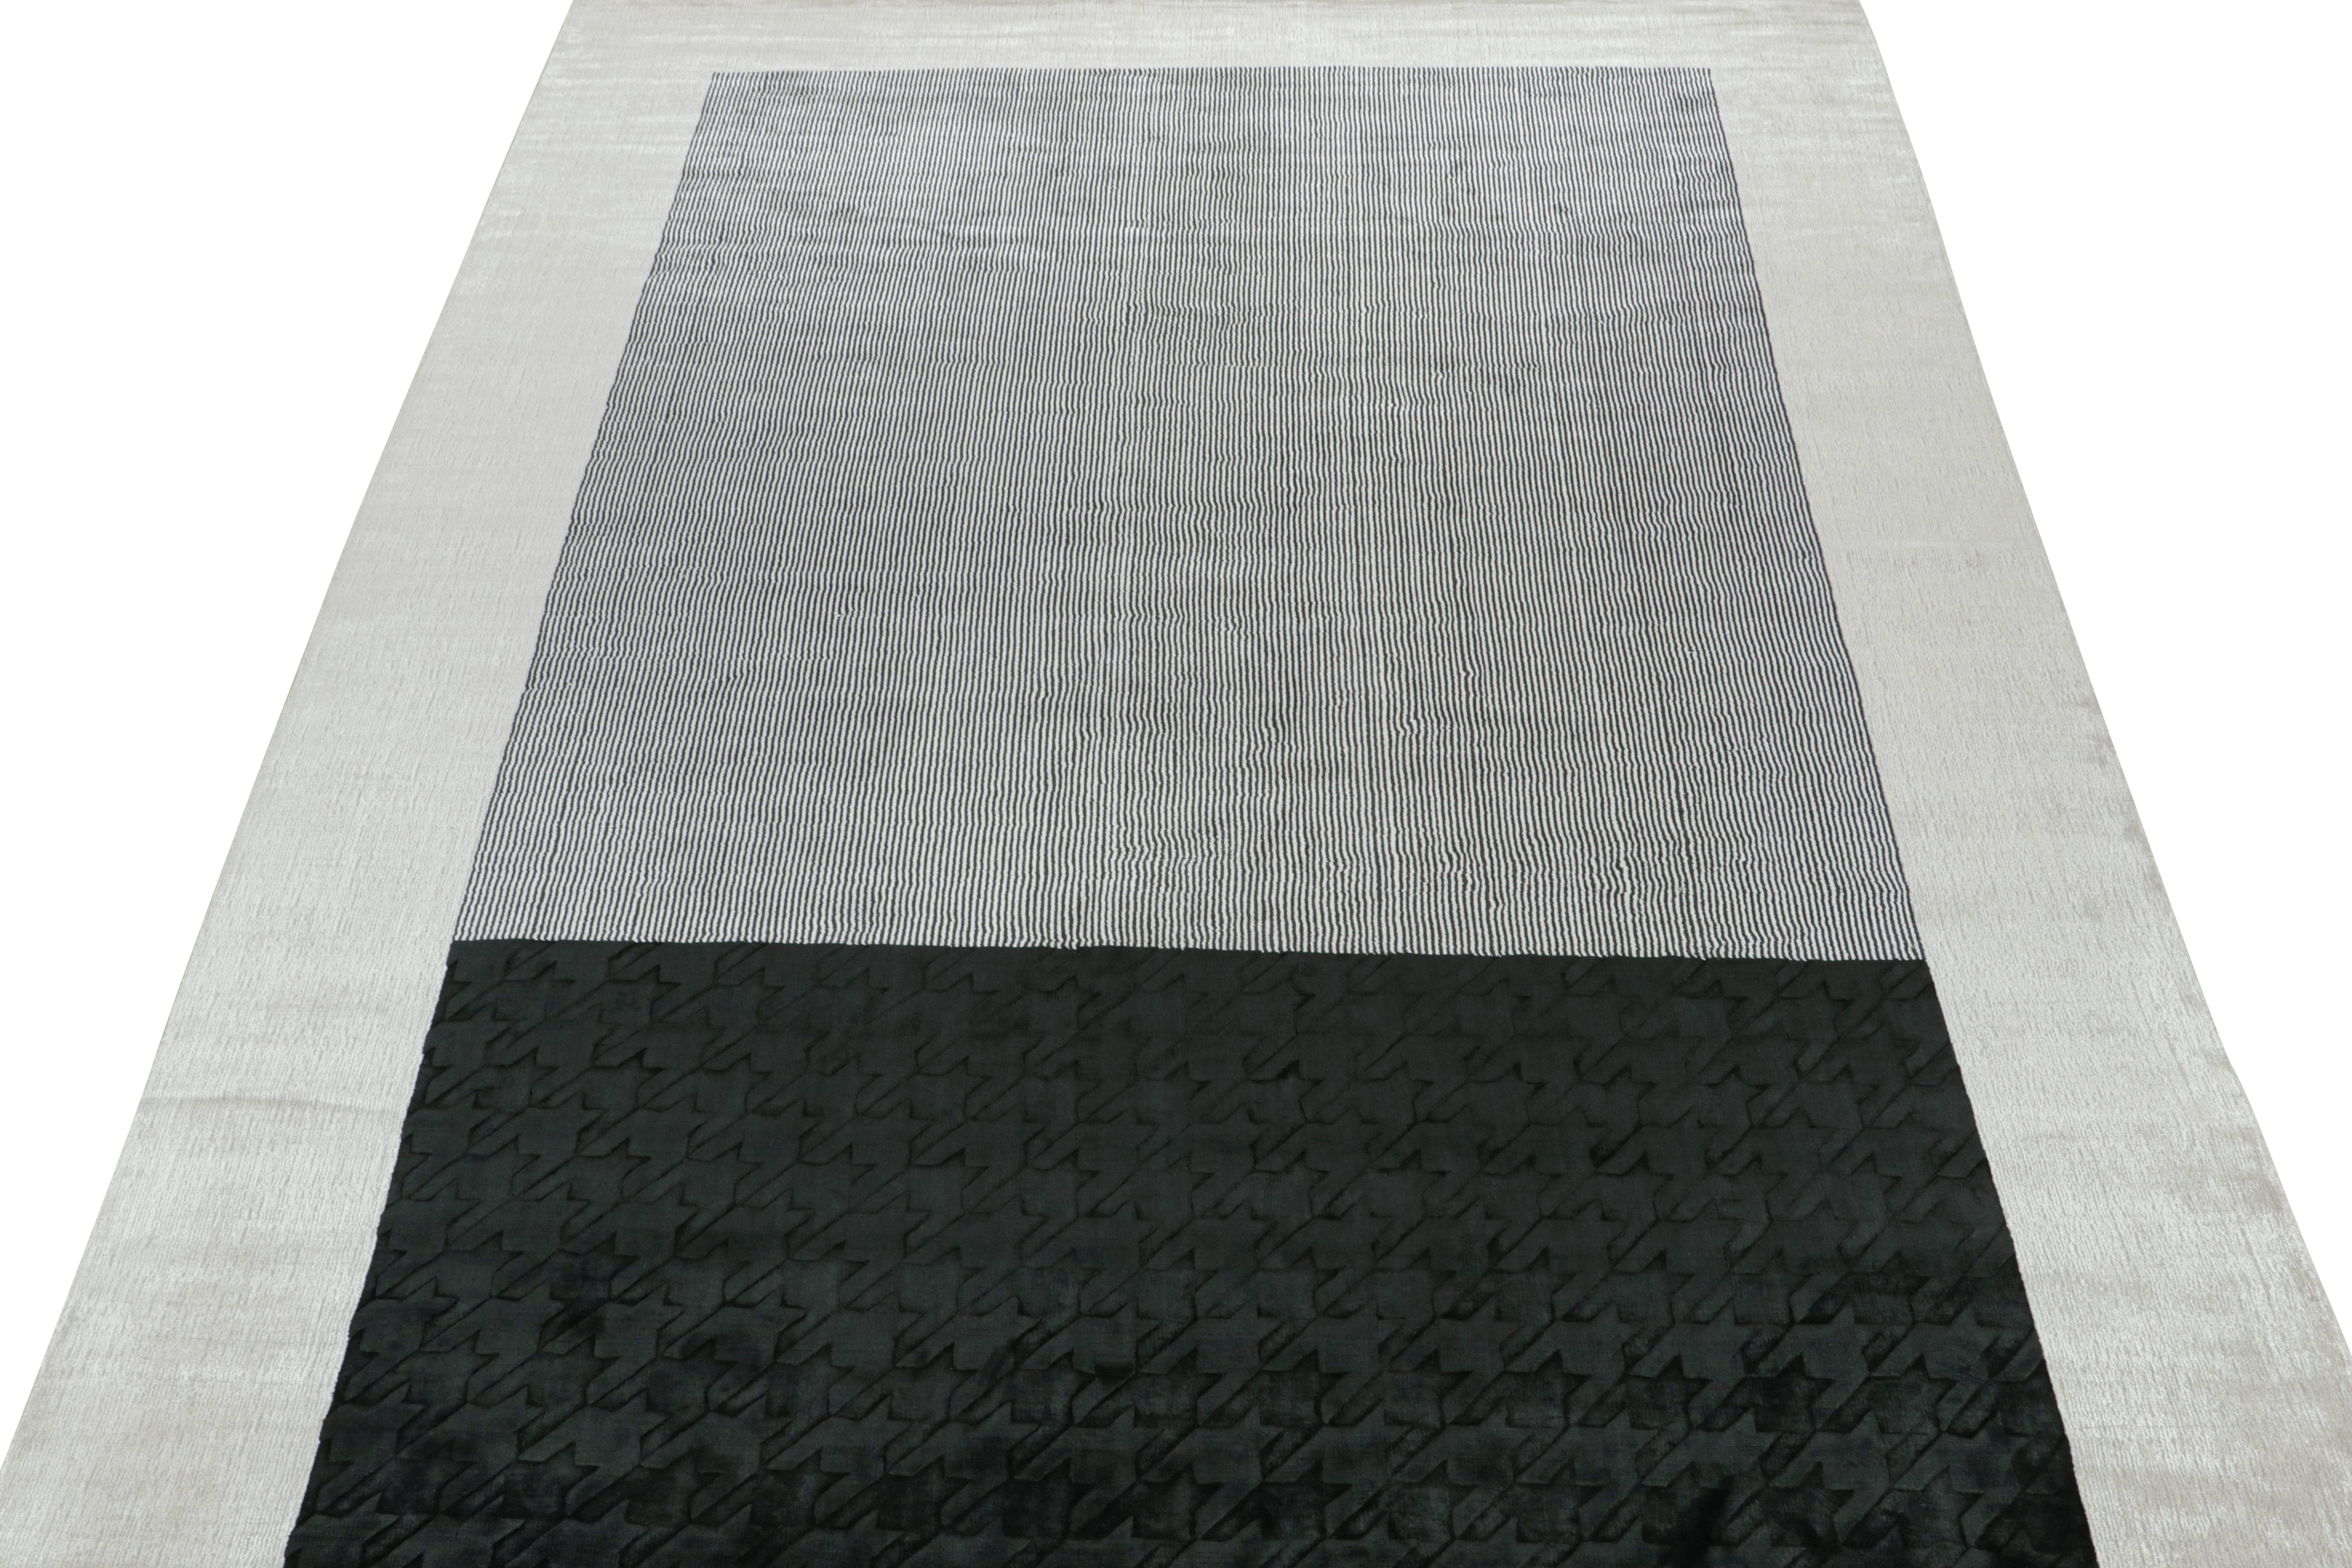 Indian Rug & Kilim’s Modern Rug in Black and White Geometric Patterns For Sale